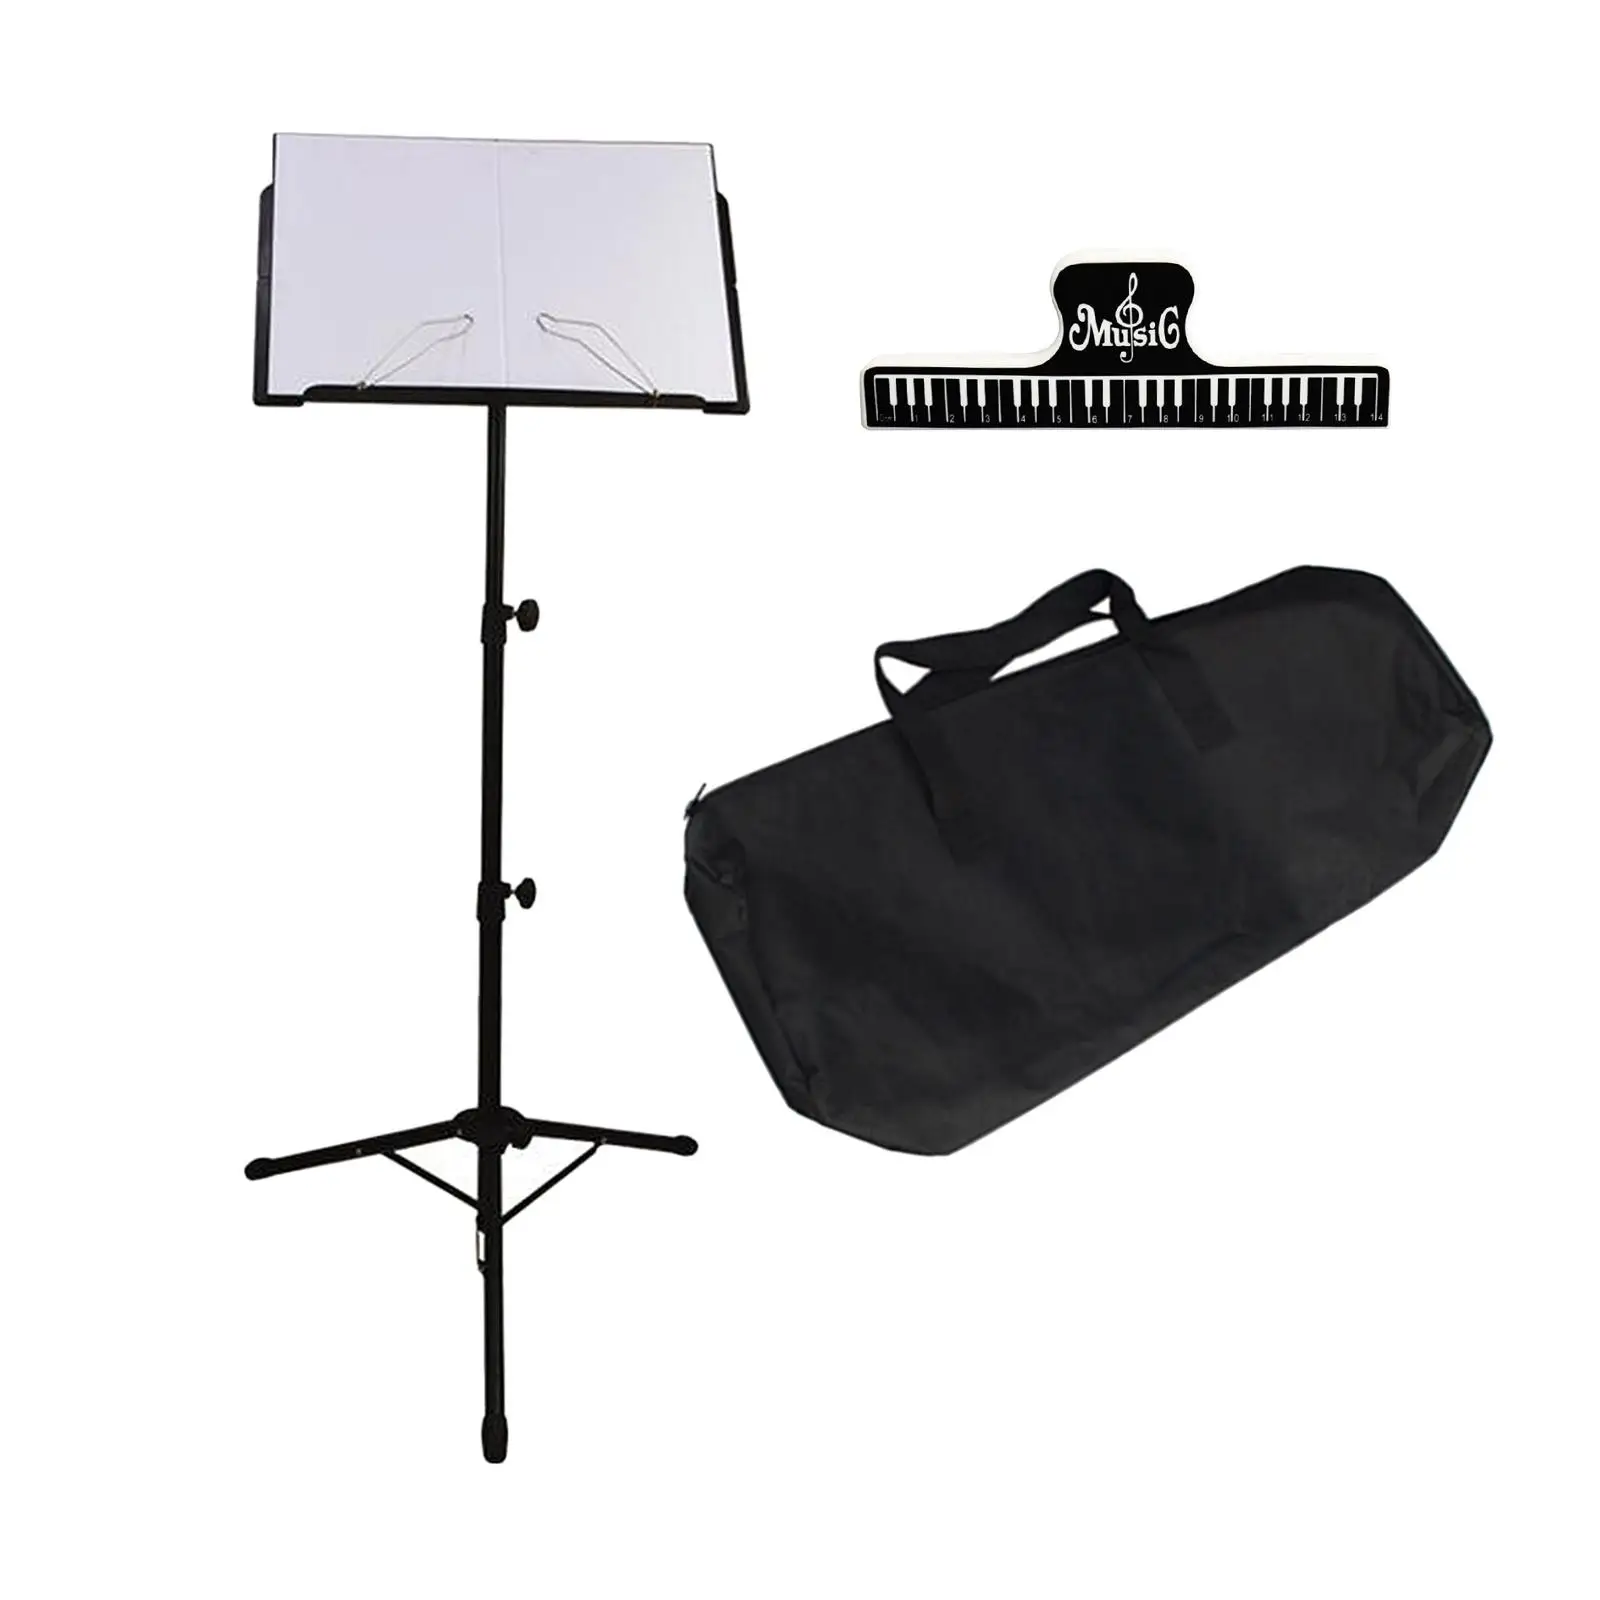 Professional Sheet Music Stand w/ Clip Holder Adjustable Height from 26